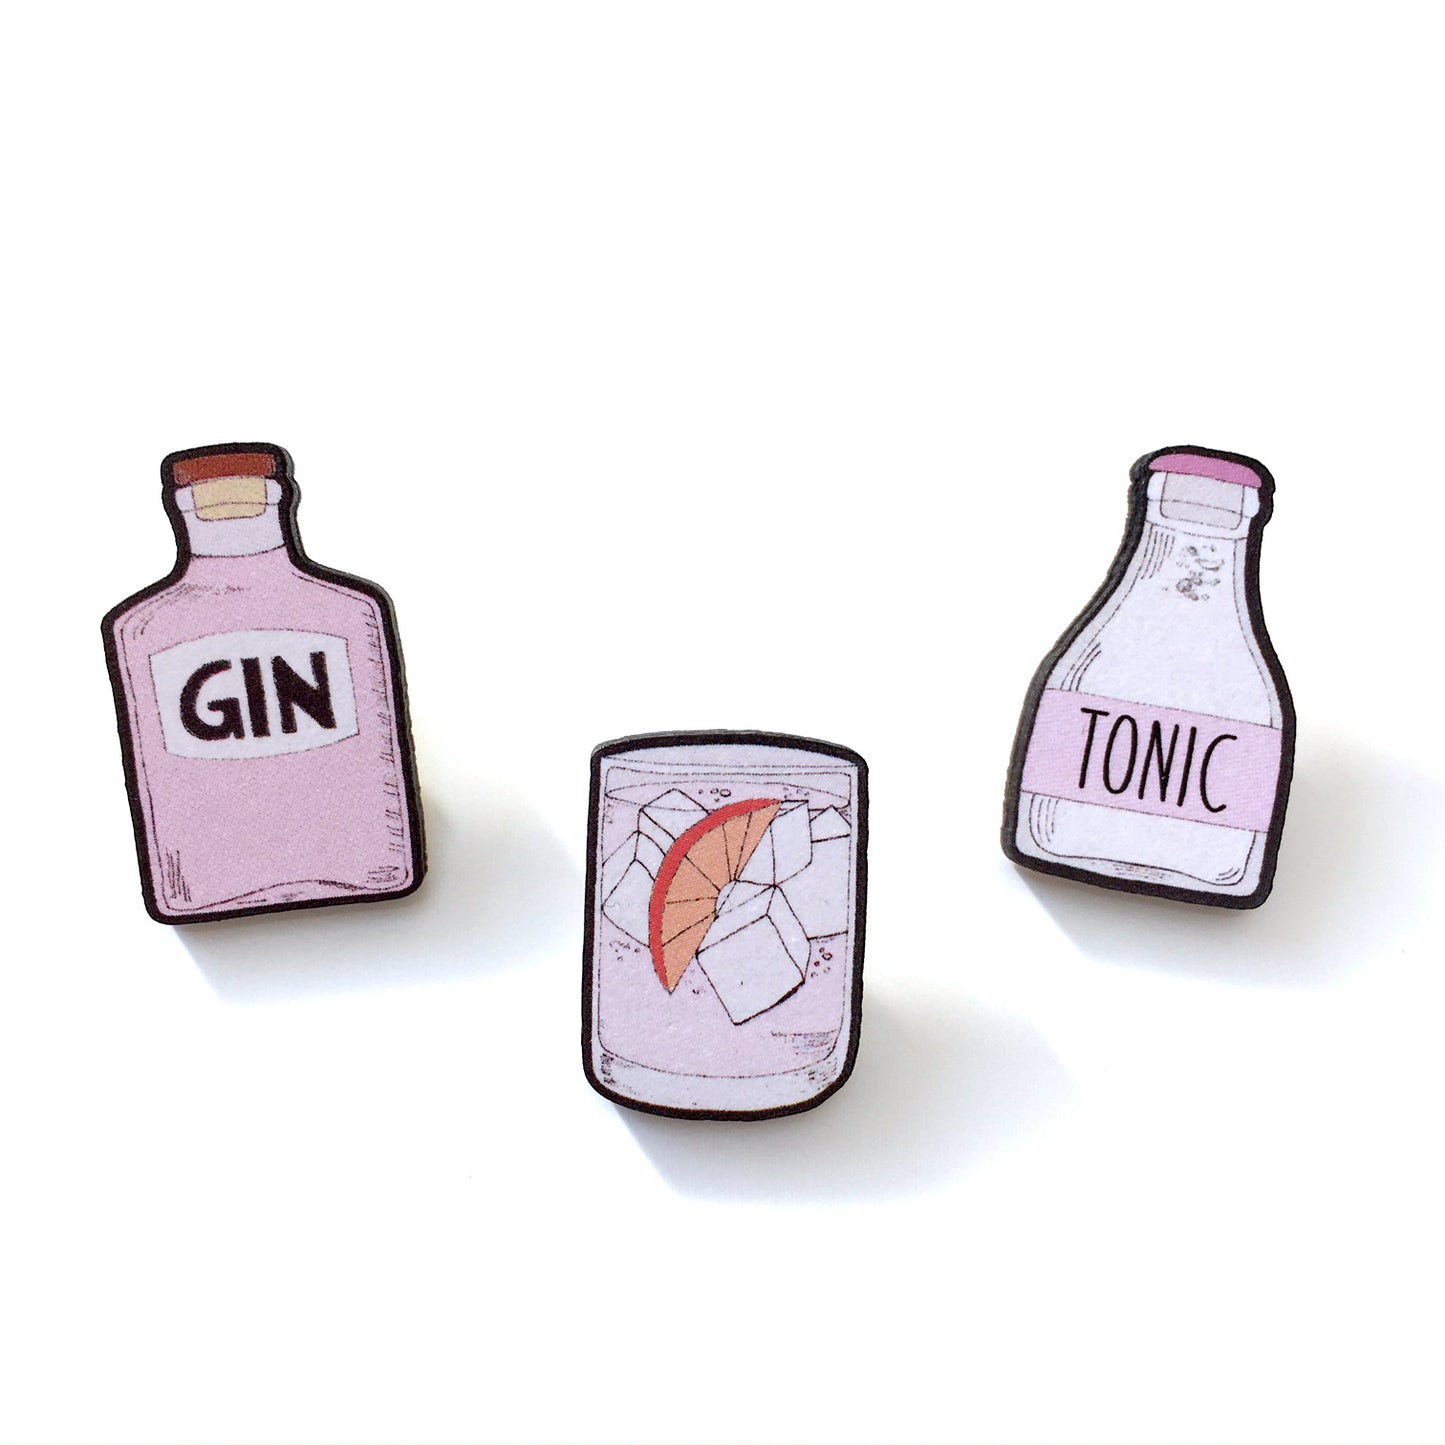 Gin lover gift - Set of 3 pins